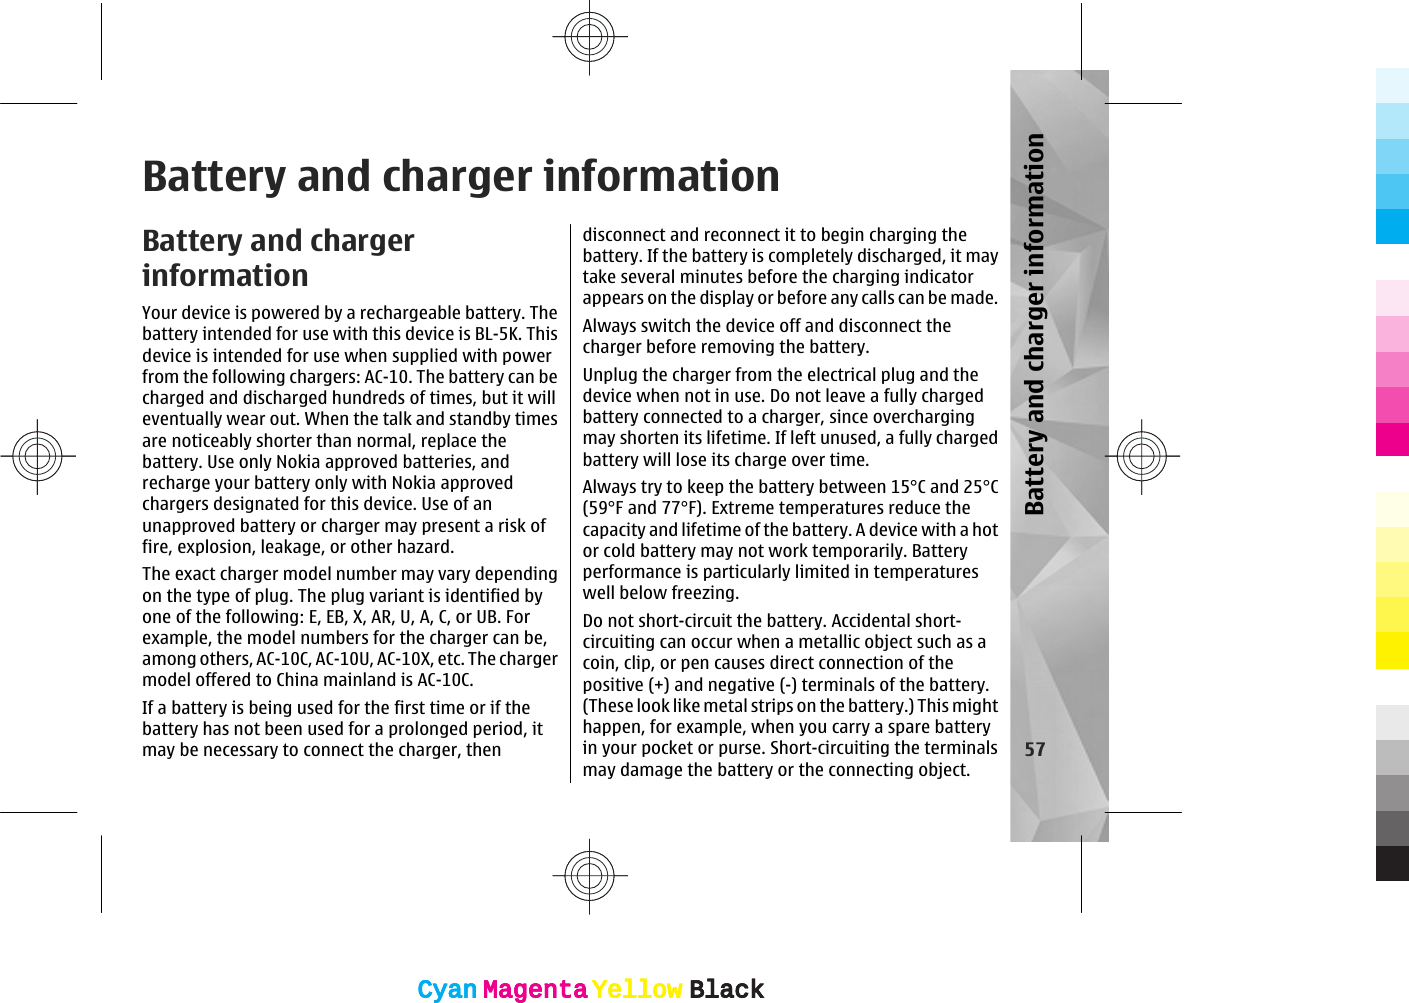 Battery and charger informationBattery and chargerinformationYour device is powered by a rechargeable battery. Thebattery intended for use with this device is BL-5K. Thisdevice is intended for use when supplied with powerfrom the following chargers: AC-10. The battery can becharged and discharged hundreds of times, but it willeventually wear out. When the talk and standby timesare noticeably shorter than normal, replace thebattery. Use only Nokia approved batteries, andrecharge your battery only with Nokia approvedchargers designated for this device. Use of anunapproved battery or charger may present a risk offire, explosion, leakage, or other hazard.The exact charger model number may vary dependingon the type of plug. The plug variant is identified byone of the following: E, EB, X, AR, U, A, C, or UB. Forexample, the model numbers for the charger can be,among others, AC-10C, AC-10U, AC-10X, etc. The chargermodel offered to China mainland is AC-10C.If a battery is being used for the first time or if thebattery has not been used for a prolonged period, itmay be necessary to connect the charger, thendisconnect and reconnect it to begin charging thebattery. If the battery is completely discharged, it maytake several minutes before the charging indicatorappears on the display or before any calls can be made.Always switch the device off and disconnect thecharger before removing the battery.Unplug the charger from the electrical plug and thedevice when not in use. Do not leave a fully chargedbattery connected to a charger, since overchargingmay shorten its lifetime. If left unused, a fully chargedbattery will lose its charge over time.Always try to keep the battery between 15°C and 25°C(59°F and 77°F). Extreme temperatures reduce thecapacity and lifetime of the battery. A device with a hotor cold battery may not work temporarily. Batteryperformance is particularly limited in temperatureswell below freezing.Do not short-circuit the battery. Accidental short-circuiting can occur when a metallic object such as acoin, clip, or pen causes direct connection of thepositive (+) and negative (-) terminals of the battery.(These look like metal strips on the battery.) This mighthappen, for example, when you carry a spare batteryin your pocket or purse. Short-circuiting the terminalsmay damage the battery or the connecting object.57Battery and charger informationCyanCyanMagentaMagentaYellowYellowBlackBlackCyanCyanMagentaMagentaYellowYellowBlackBlack